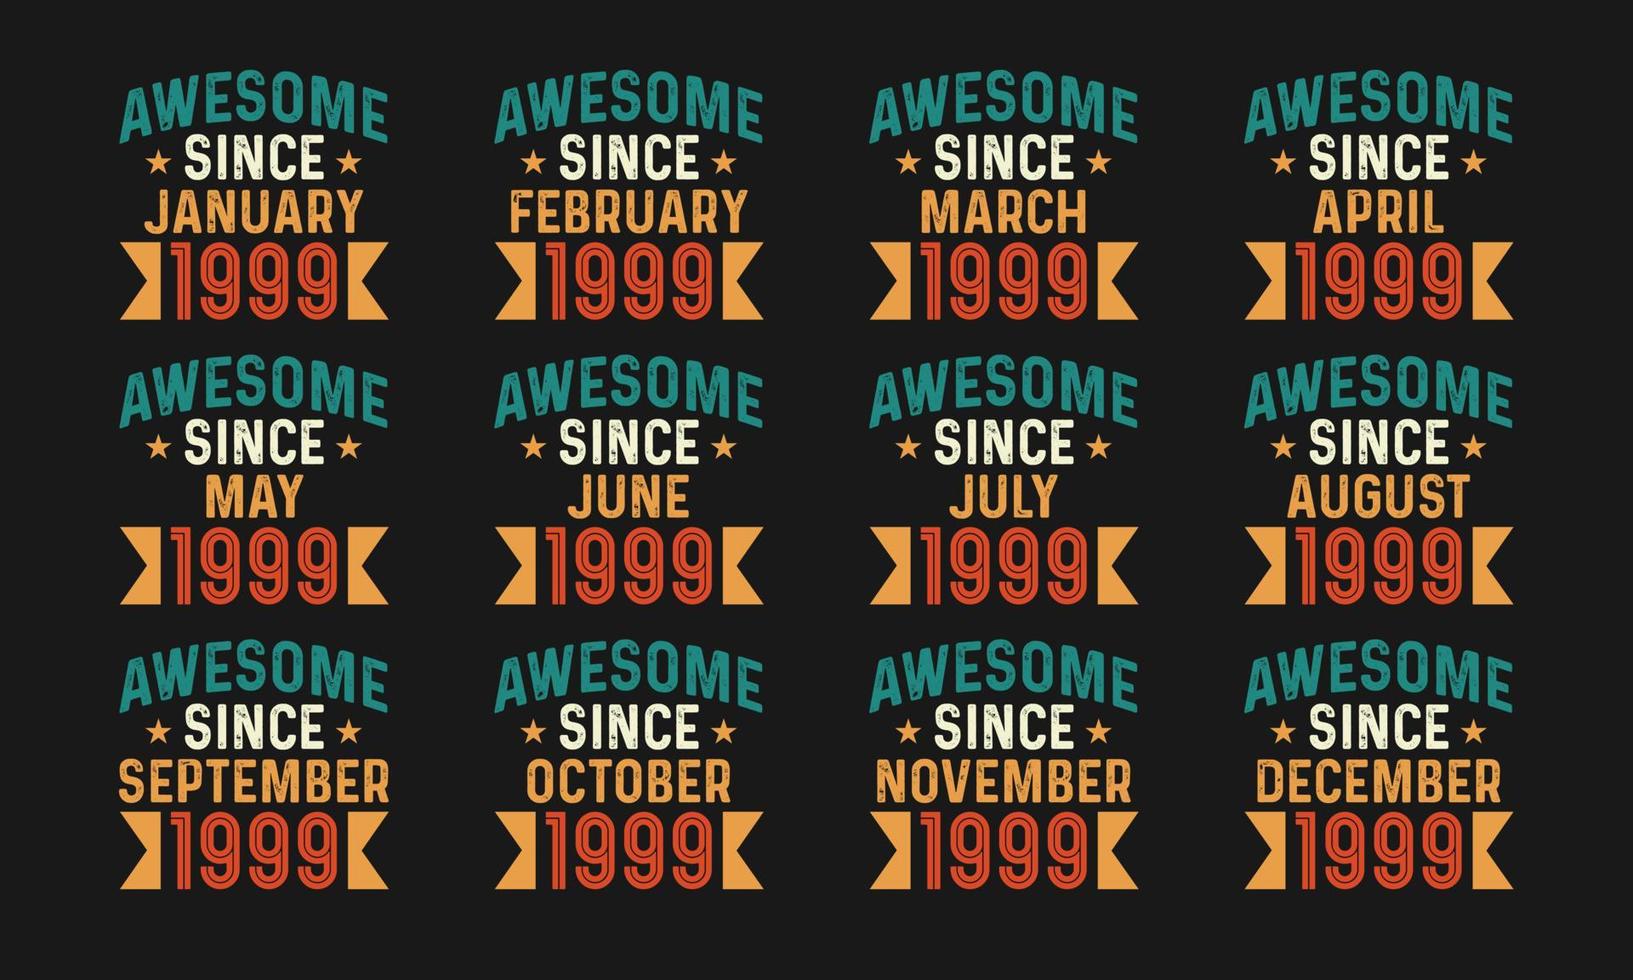 Awesome since January, February, March, April, May, June, July, August, September, October, November, and December 1999. Retro vintage all month in 1999 birthday celebration design pro download vector